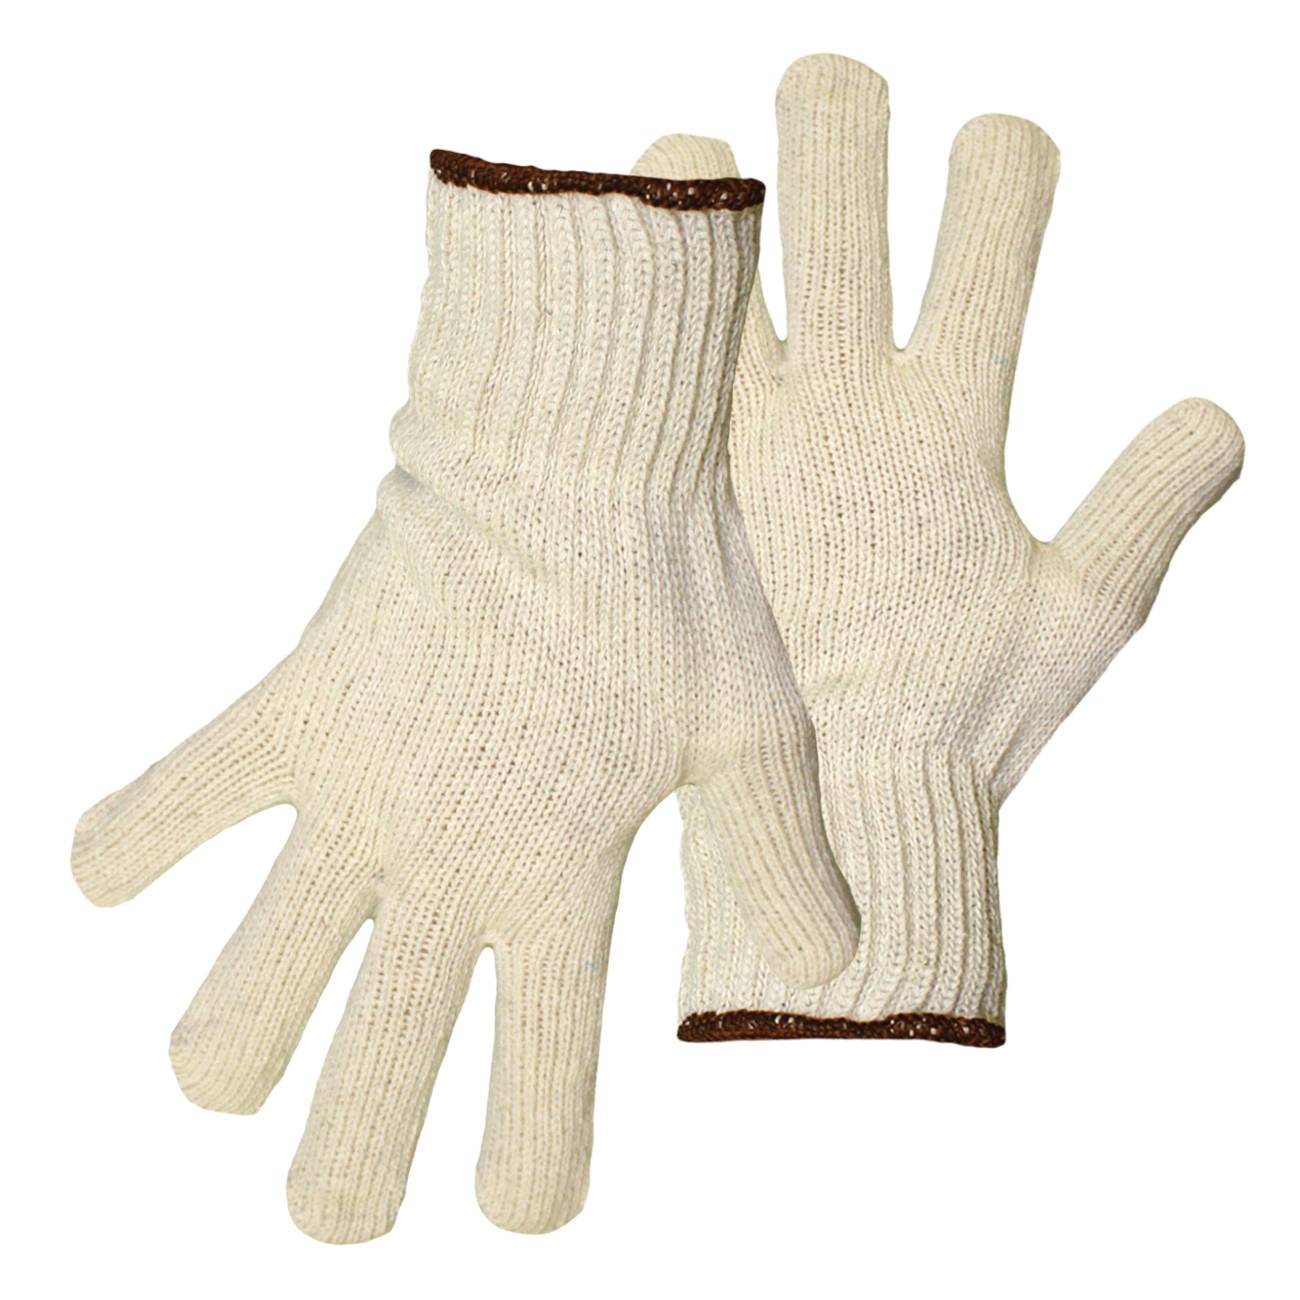 Boss® 1JC1200 Medium/Regular Weight General Purpose Work Gloves, Reversible Cut, Reversible Thumb Style, L, Textile Palm, Cotton, Natural, Seamless Knitwrist Cuff (Discontinued by Manufacturer)